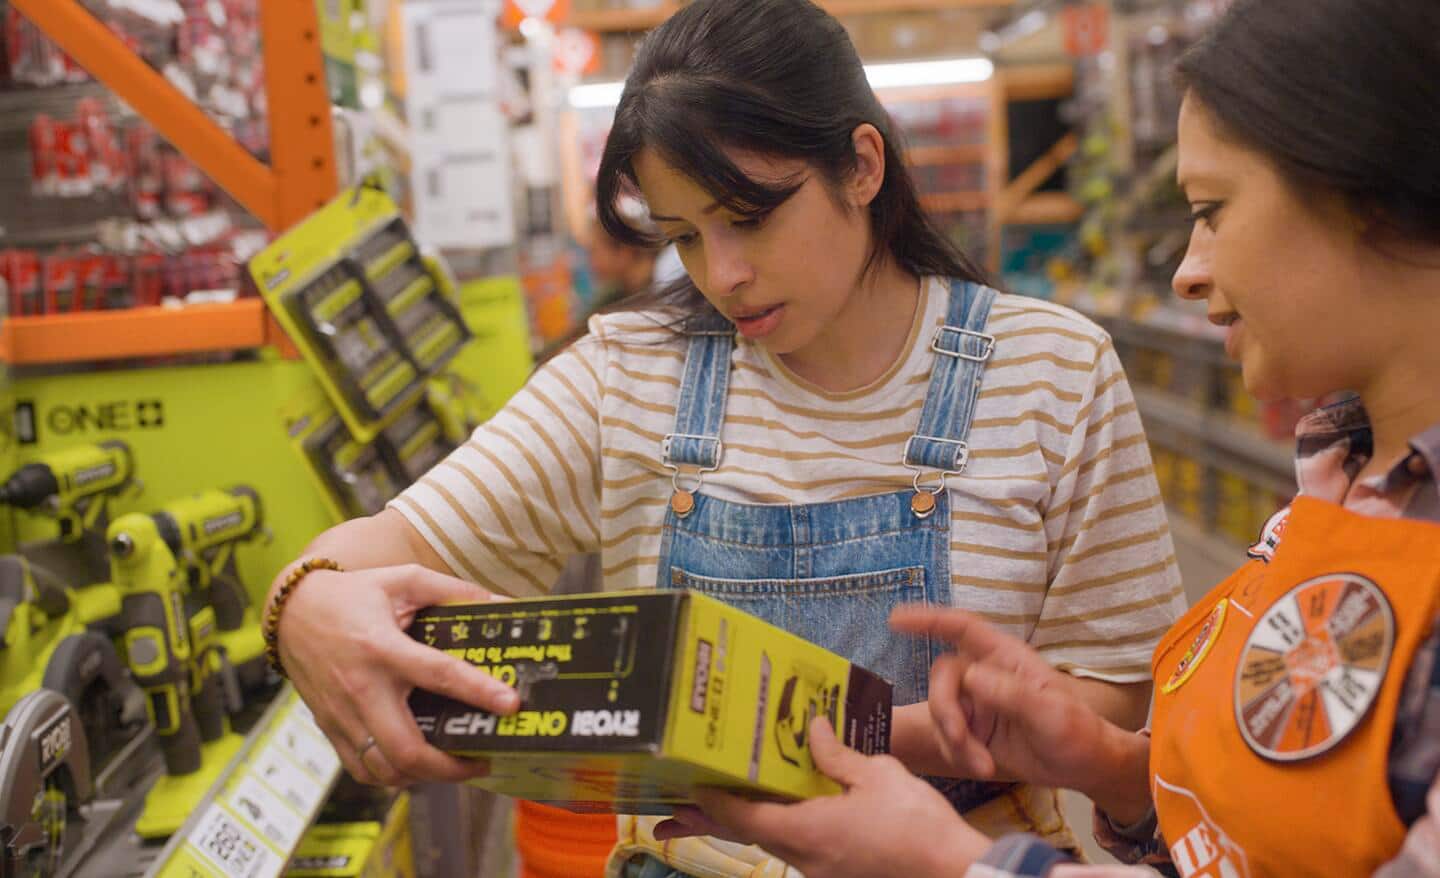 Home Depot employee shares a Ryobi power tool battery product with an inquiring customer.